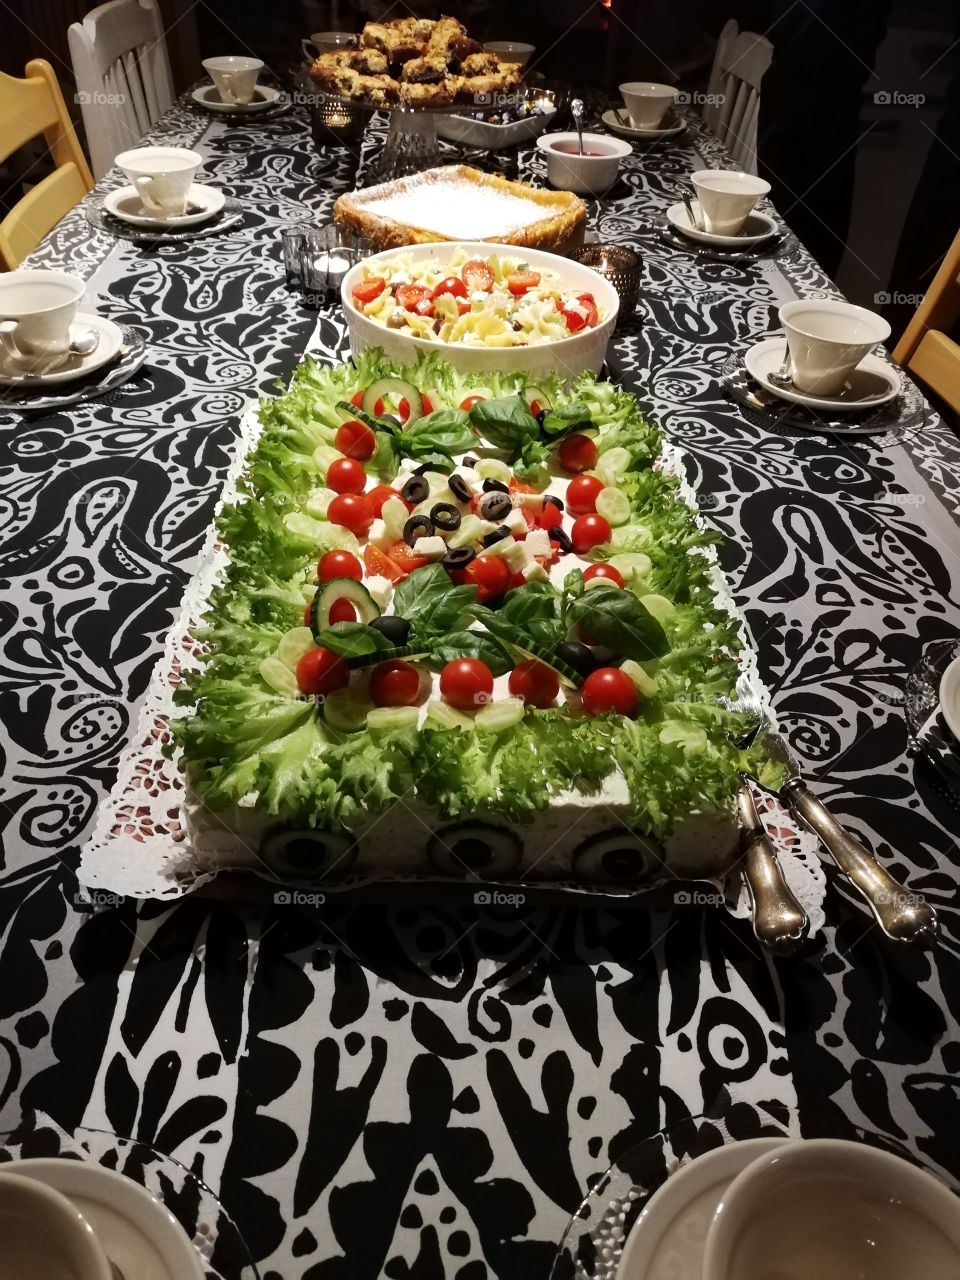 A vegetable sandwich cake on a white doily on a black and white patterned table cloth, salad spoons on the side. Pasta salad, cheese cake, the pieces of chocolate cake and rasperry jam. The light beige coffee cups and tealights in the glass bowls.